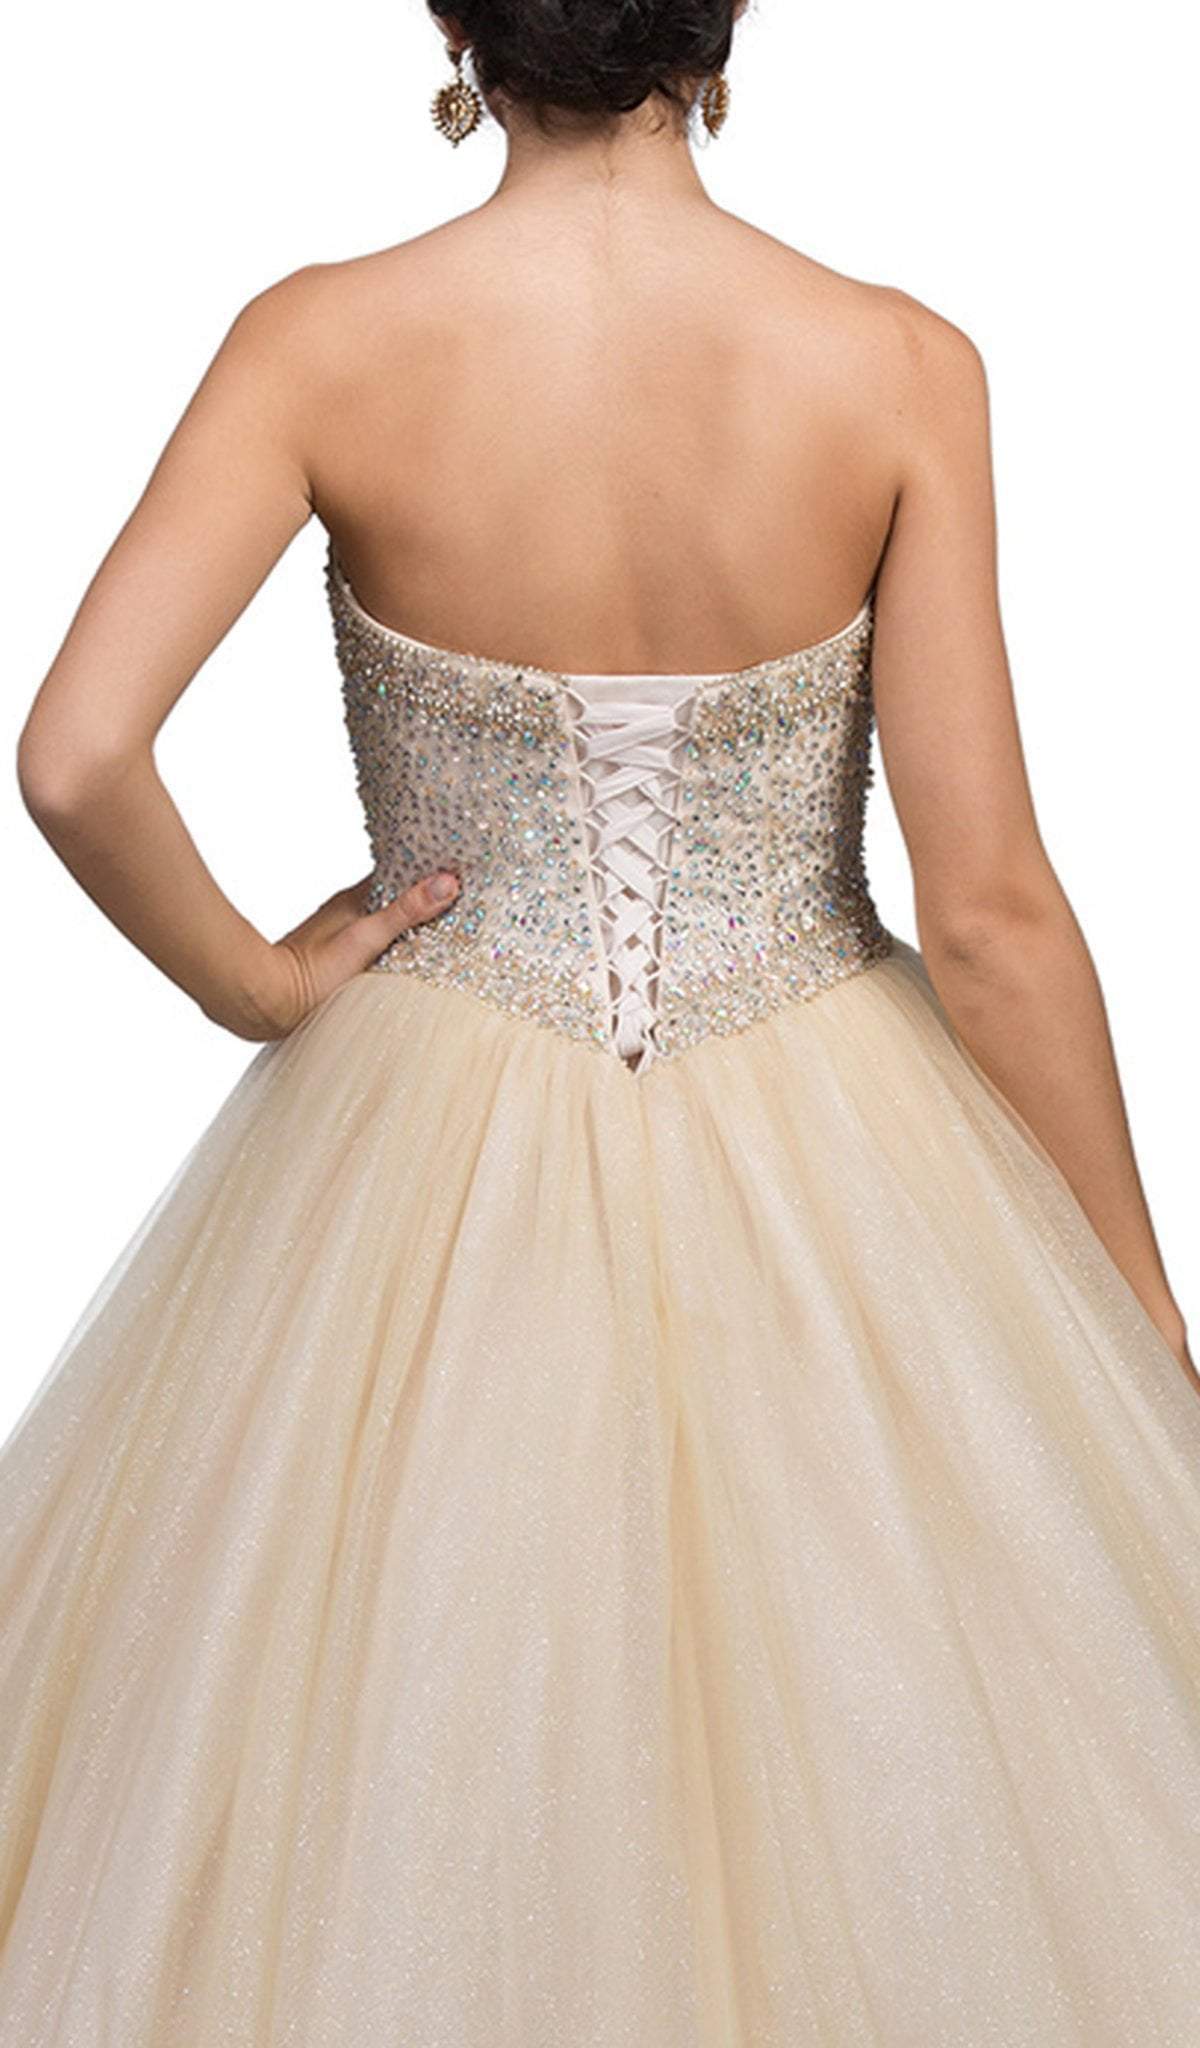 Dancing Queen - 1226 Strapless Bejeweled Sweetheart Quinceanera Ballgown Special Occasion Dress XL / Champagne